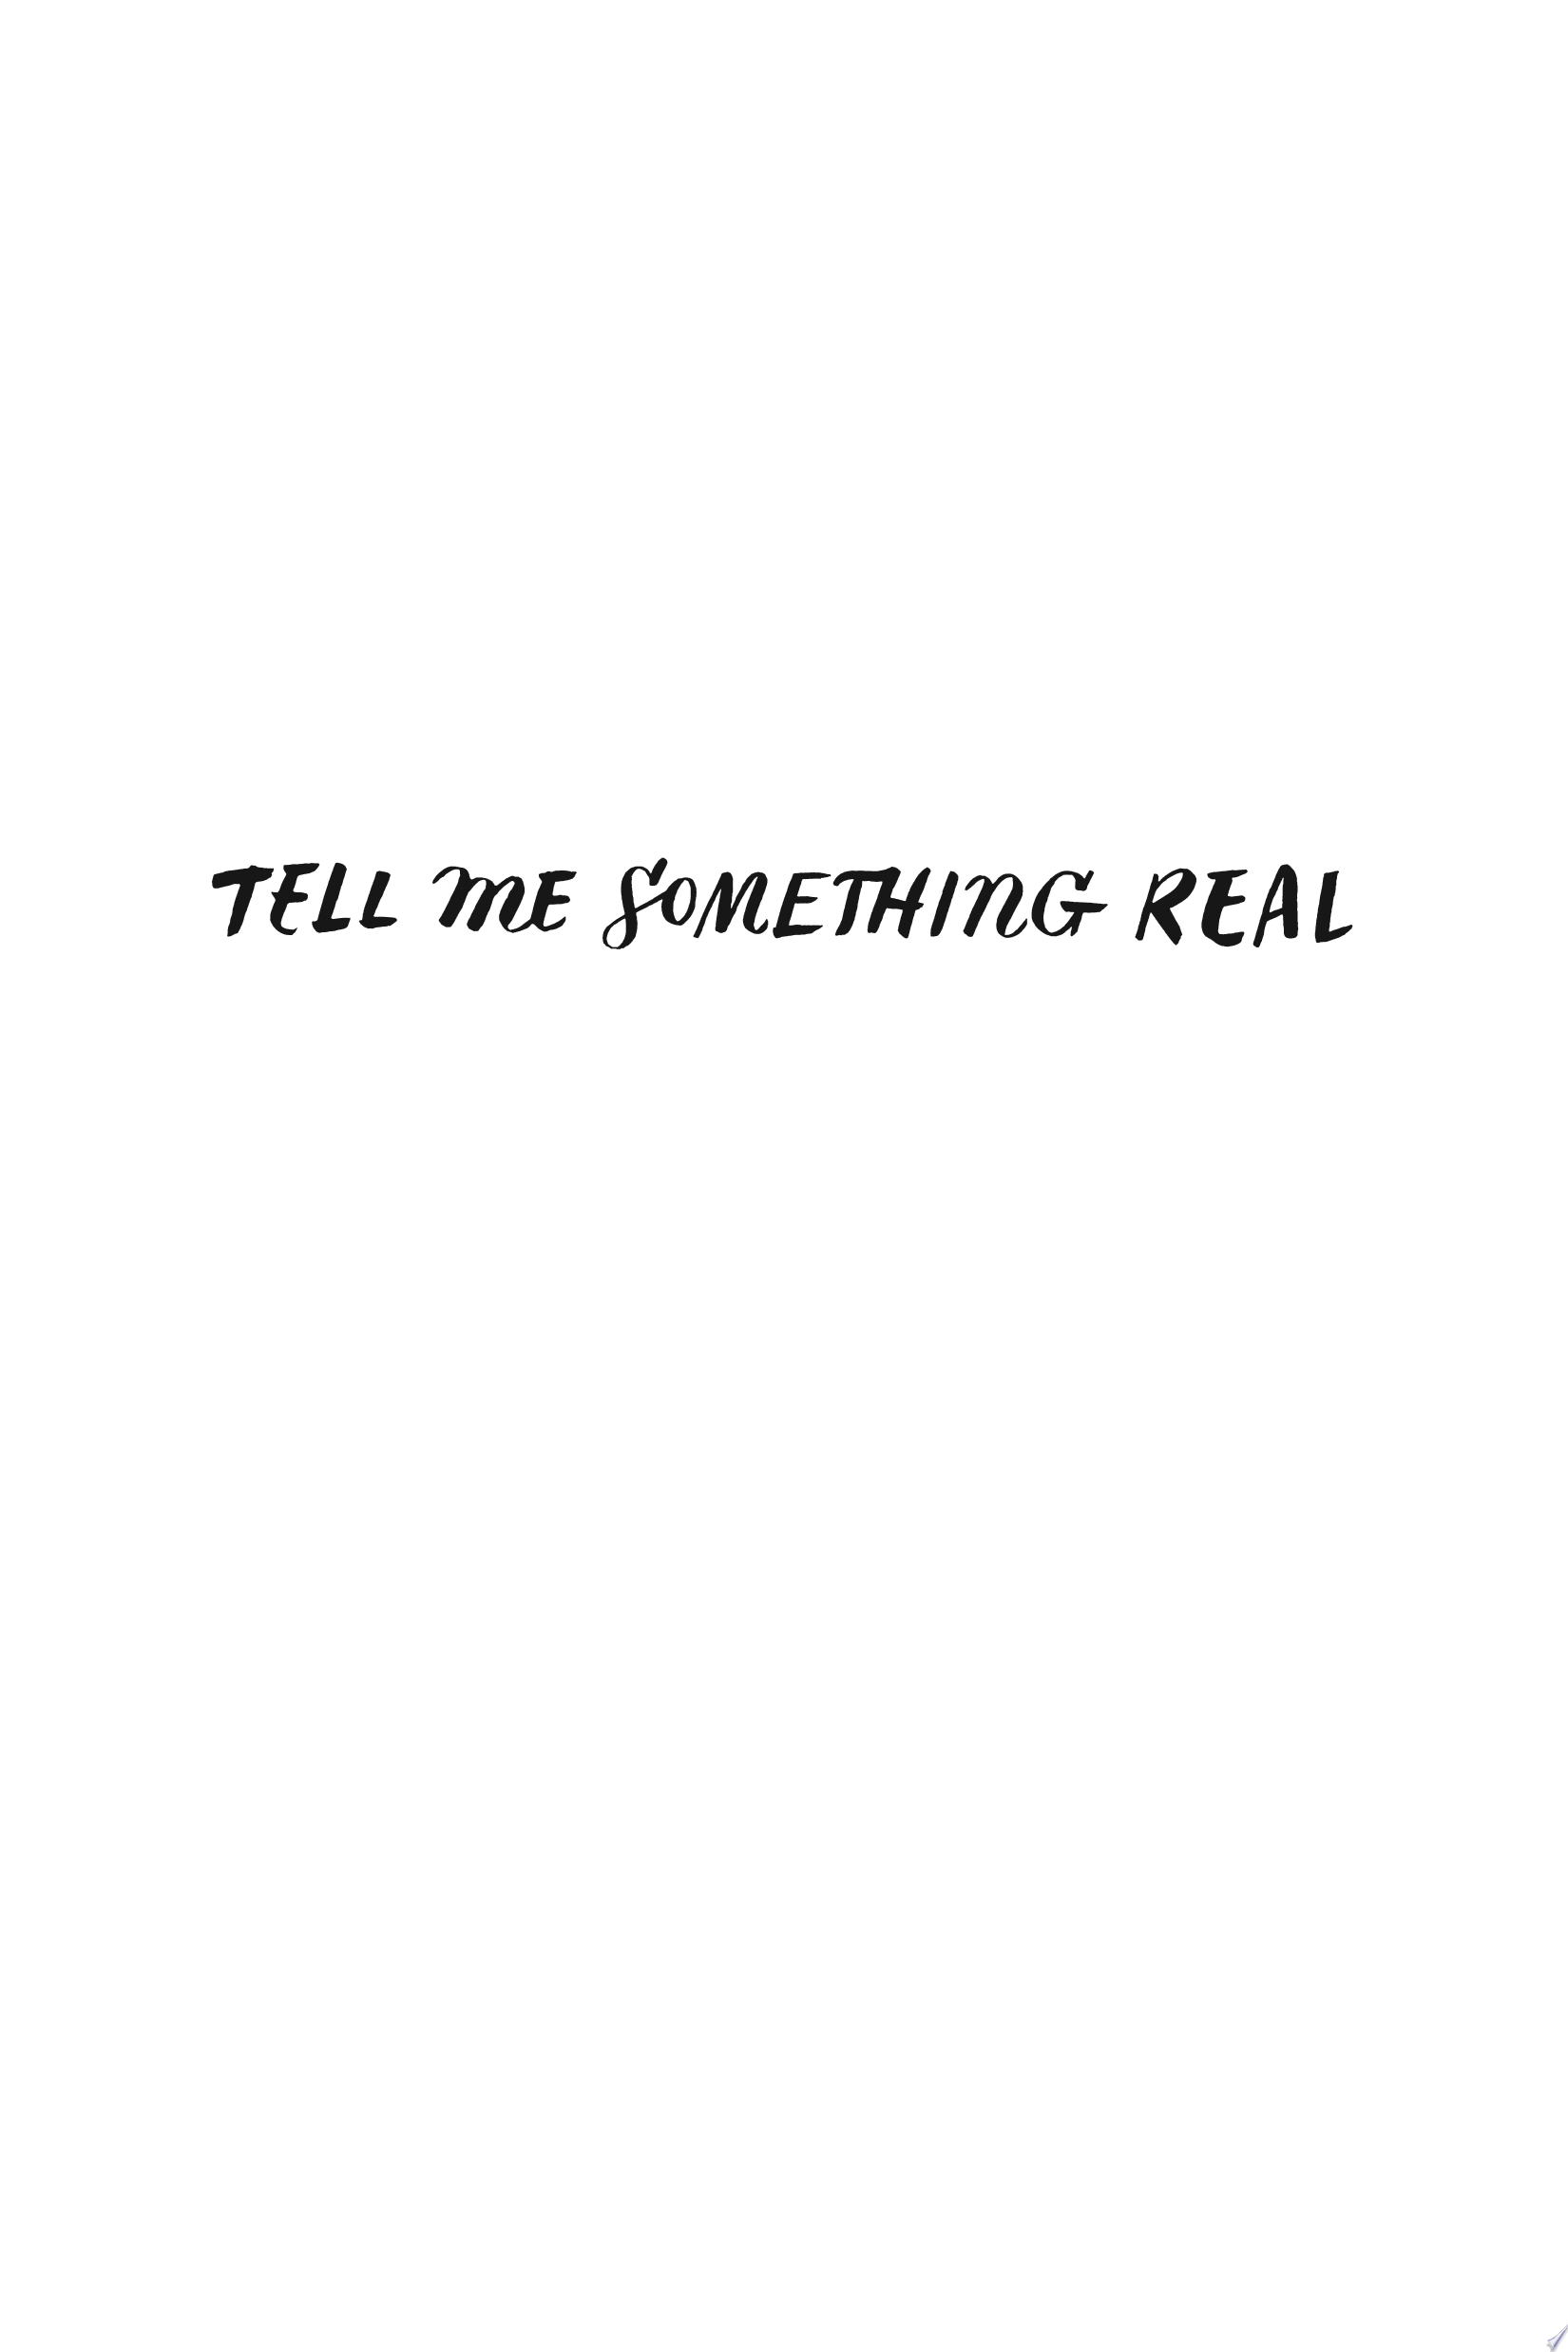 Image for "Tell Me Something Real"